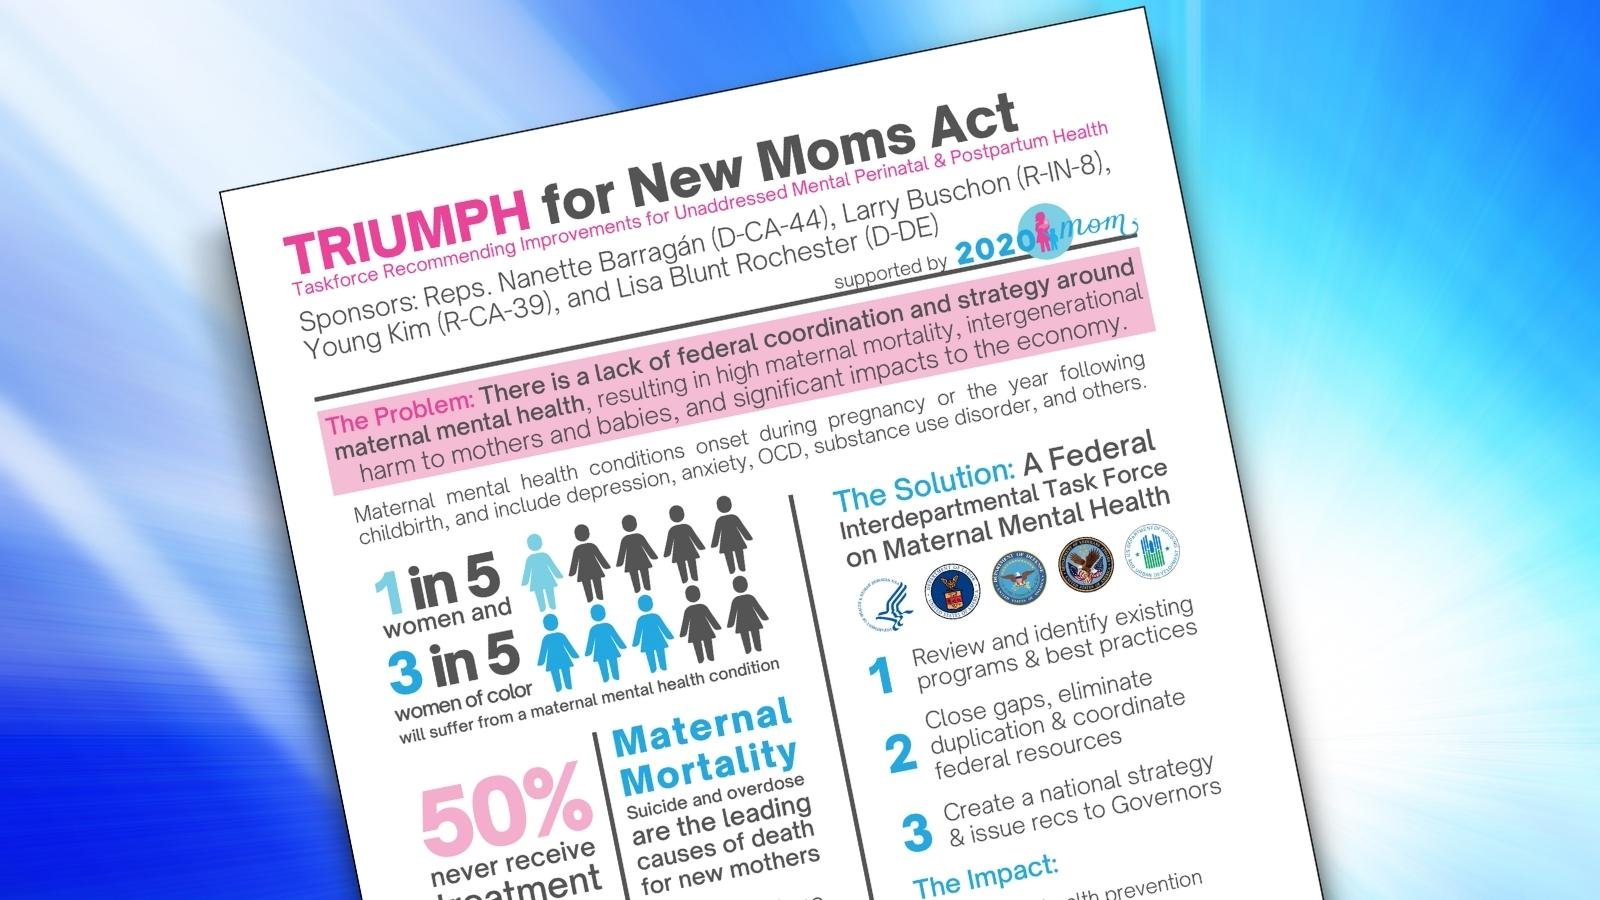 TRIUMPH for New Moms Act